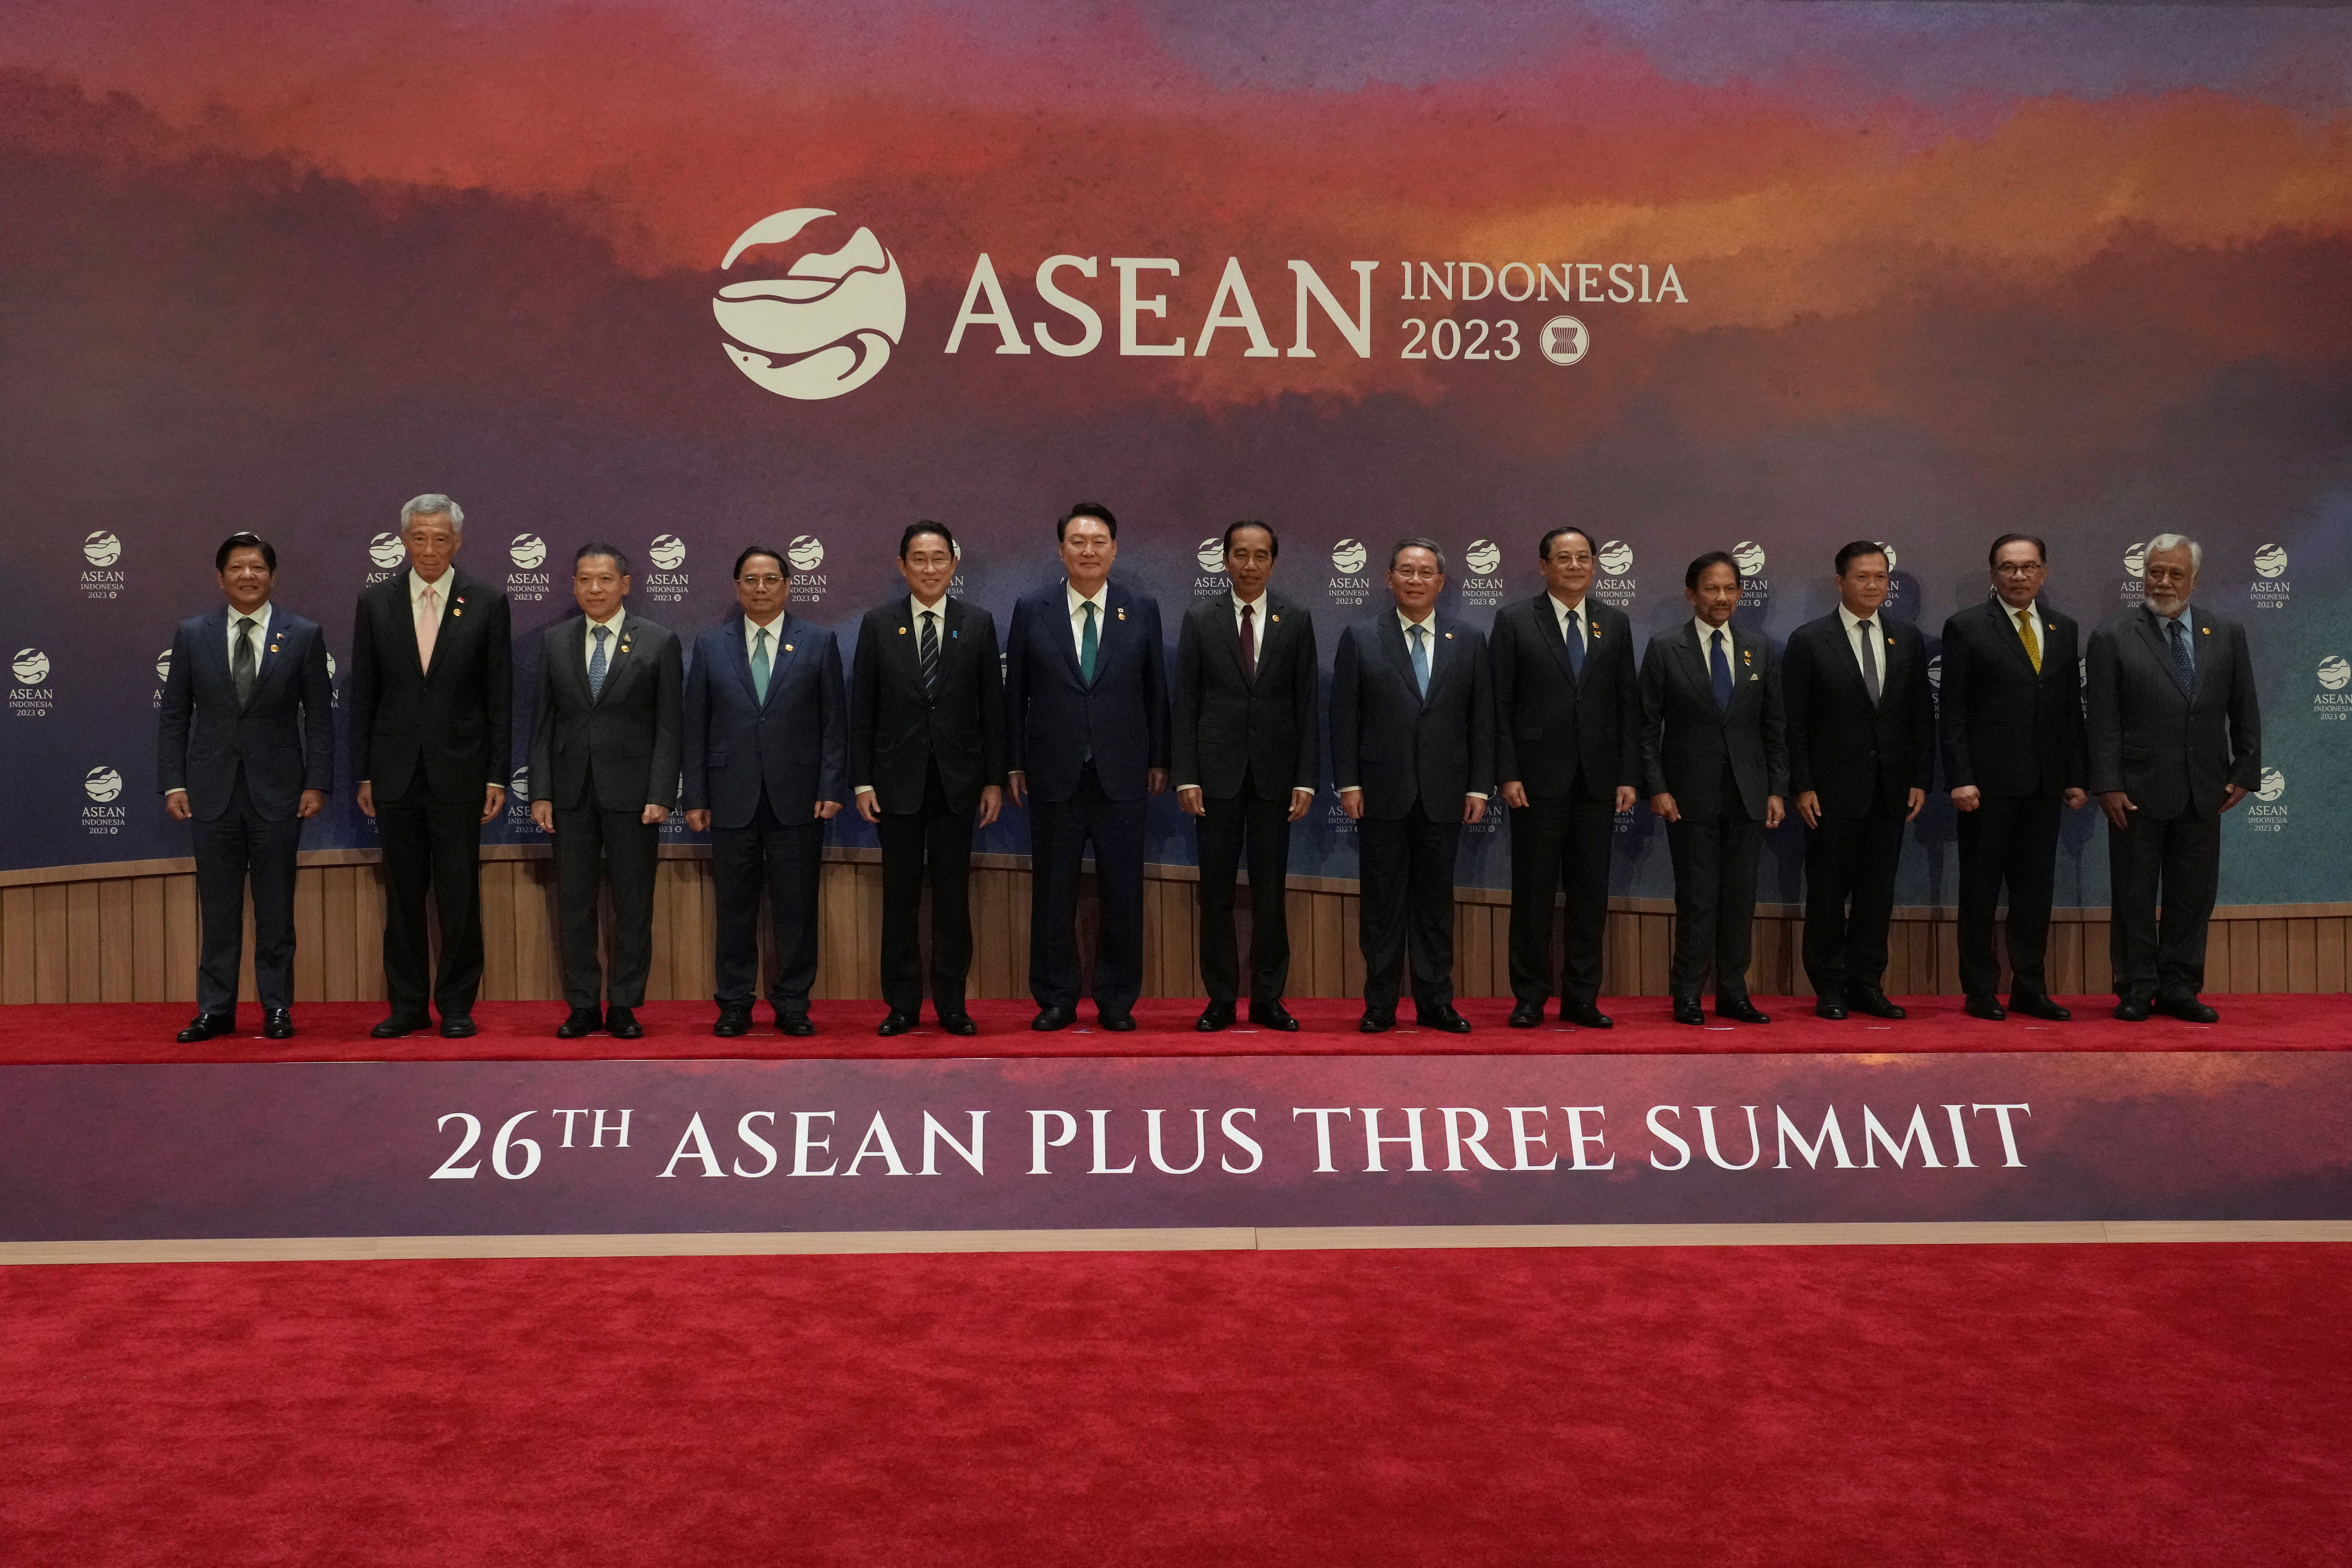 From left to right, Philippines president Ferdinand Marcos Jr, Singapore's prime minister Lee Hsien Loong, Thailand's permanent secretary of the ministry of foreign affairs Sarun Charoensuwan, Vietnam's prime minister Pham Minh Chinh, Japan's prime Mmnster Fumio Kishida, South Korean president Yoon Suk Yeol, Indonesian president Joko Widodo, Chinese premier Li Qiang, Laos' prime minister Sonexay Siphandone, Brunei's sultan Hassanal Bolkiah, Cambodia's prime minister Hun Manet, Malaysian prime minister Anwar Ibrahim and East Timor's prime minister Xanana Gusmao pose for a family photo